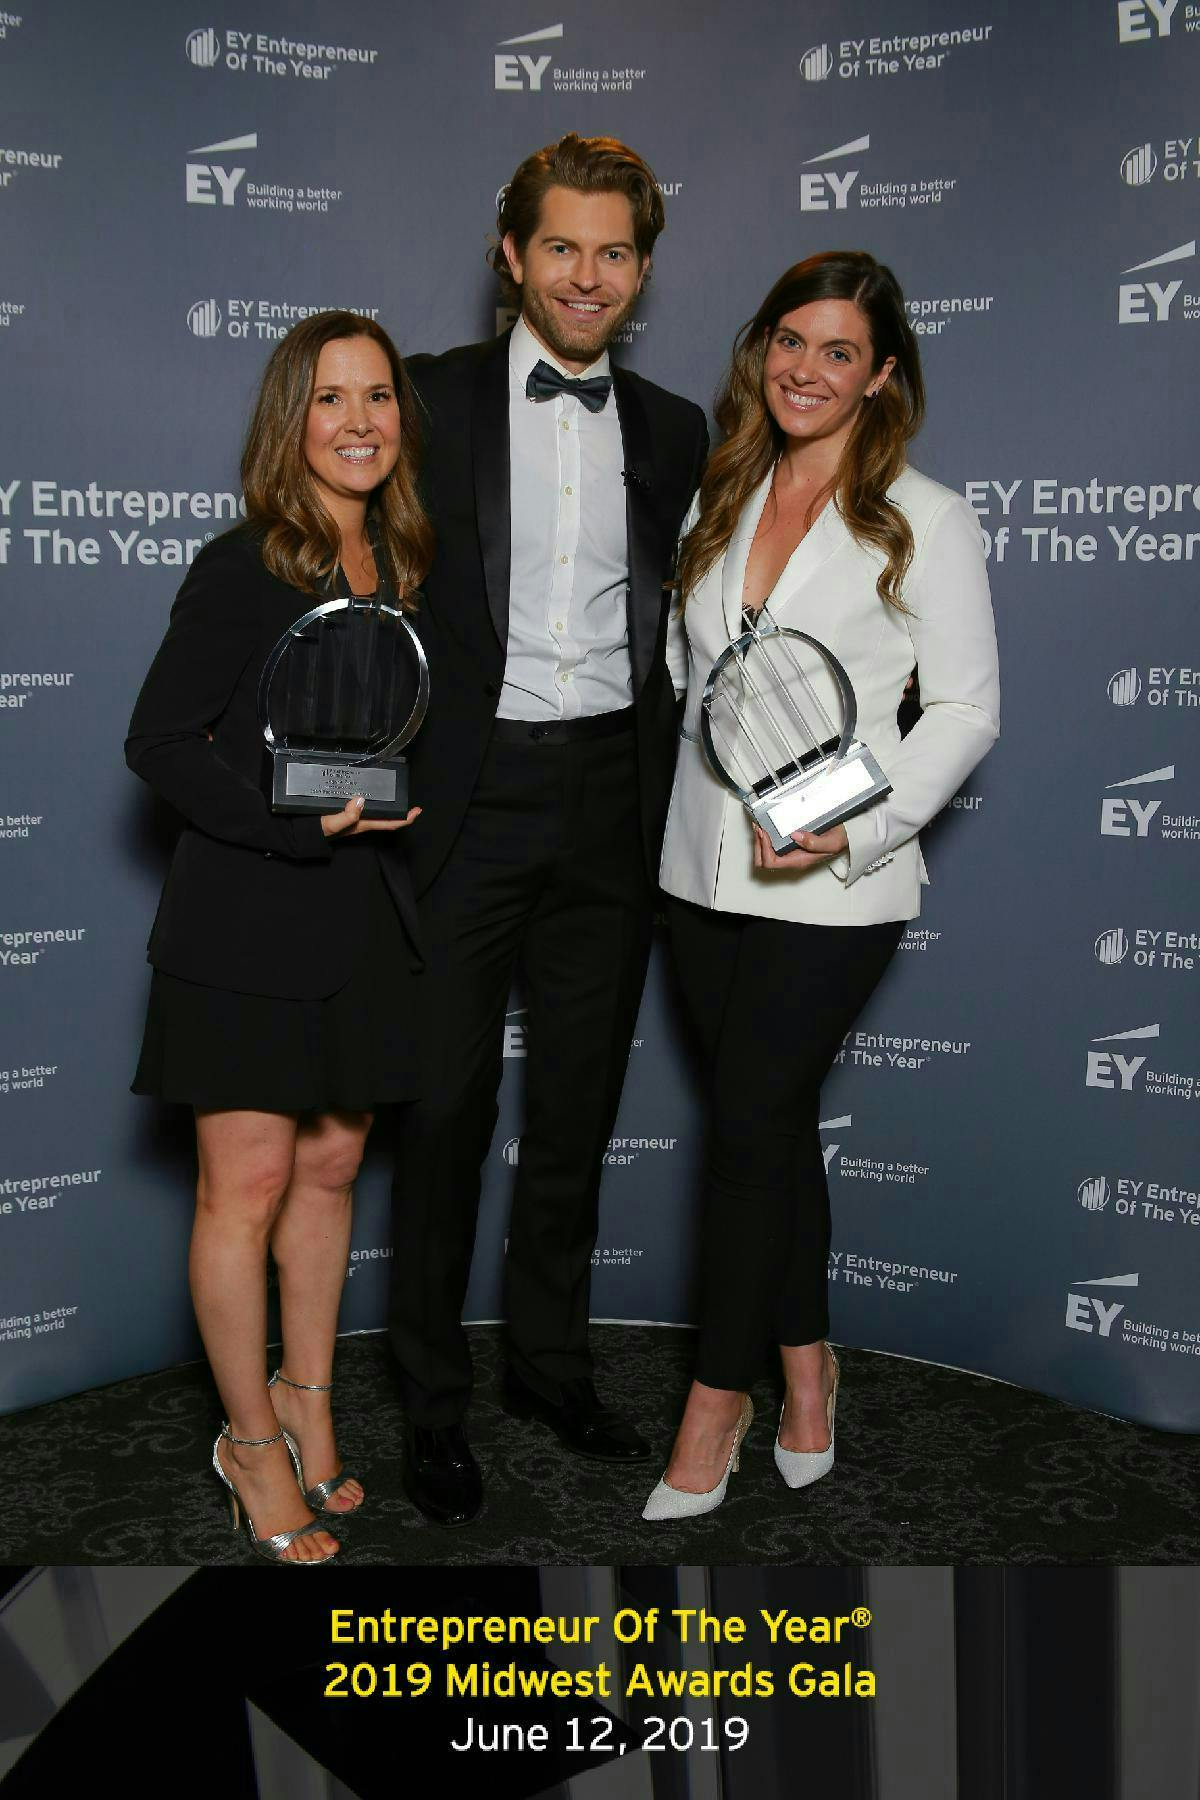 Retail Startup, The Groomsman Suit, Wins Ernst & Young Midwest Entrepreneur of The Year